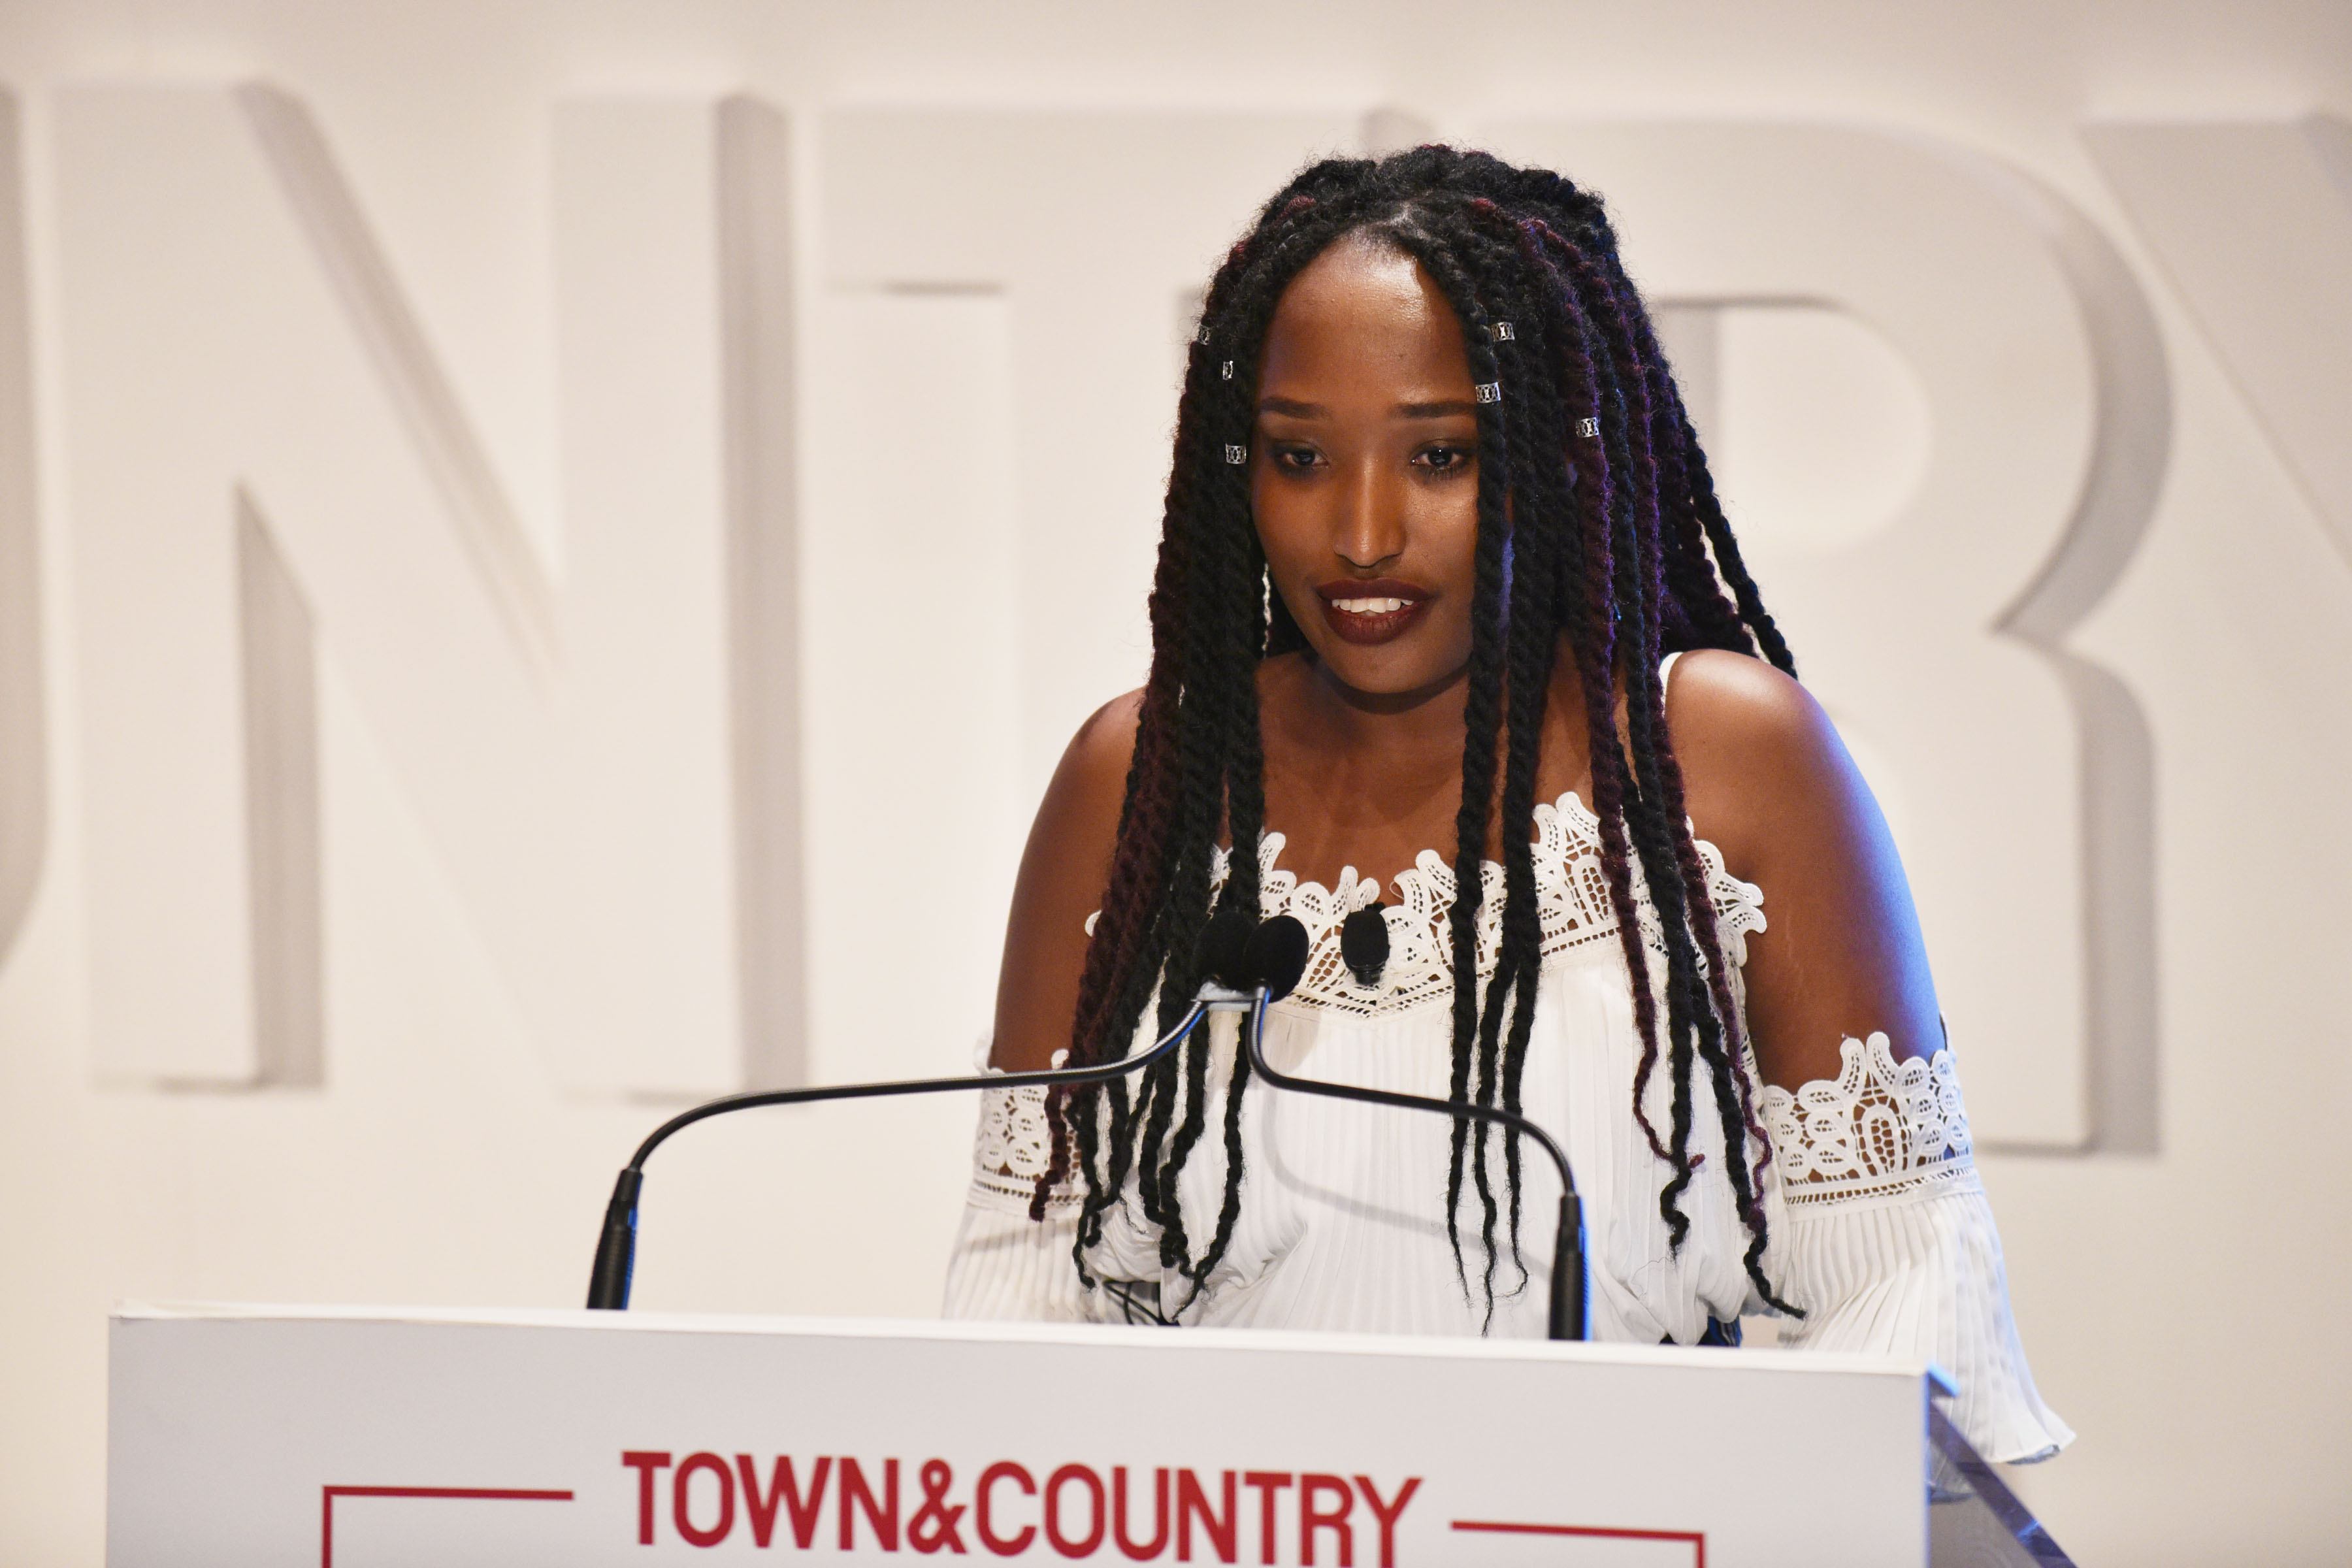 NEW YORK, NY - MAY 09:  Co-Founder of the Jimbere Fund Sandra Uwiringiyimana speaks onstage during the 4th Annual Town & Country Philanthropy Summit at Hearst Tower on May 9, 2017 in New York City.  (Photo by Bryan Bedder/Getty Images for Town & Country) (Bryan Bedder—Getty Images for Town & Country)